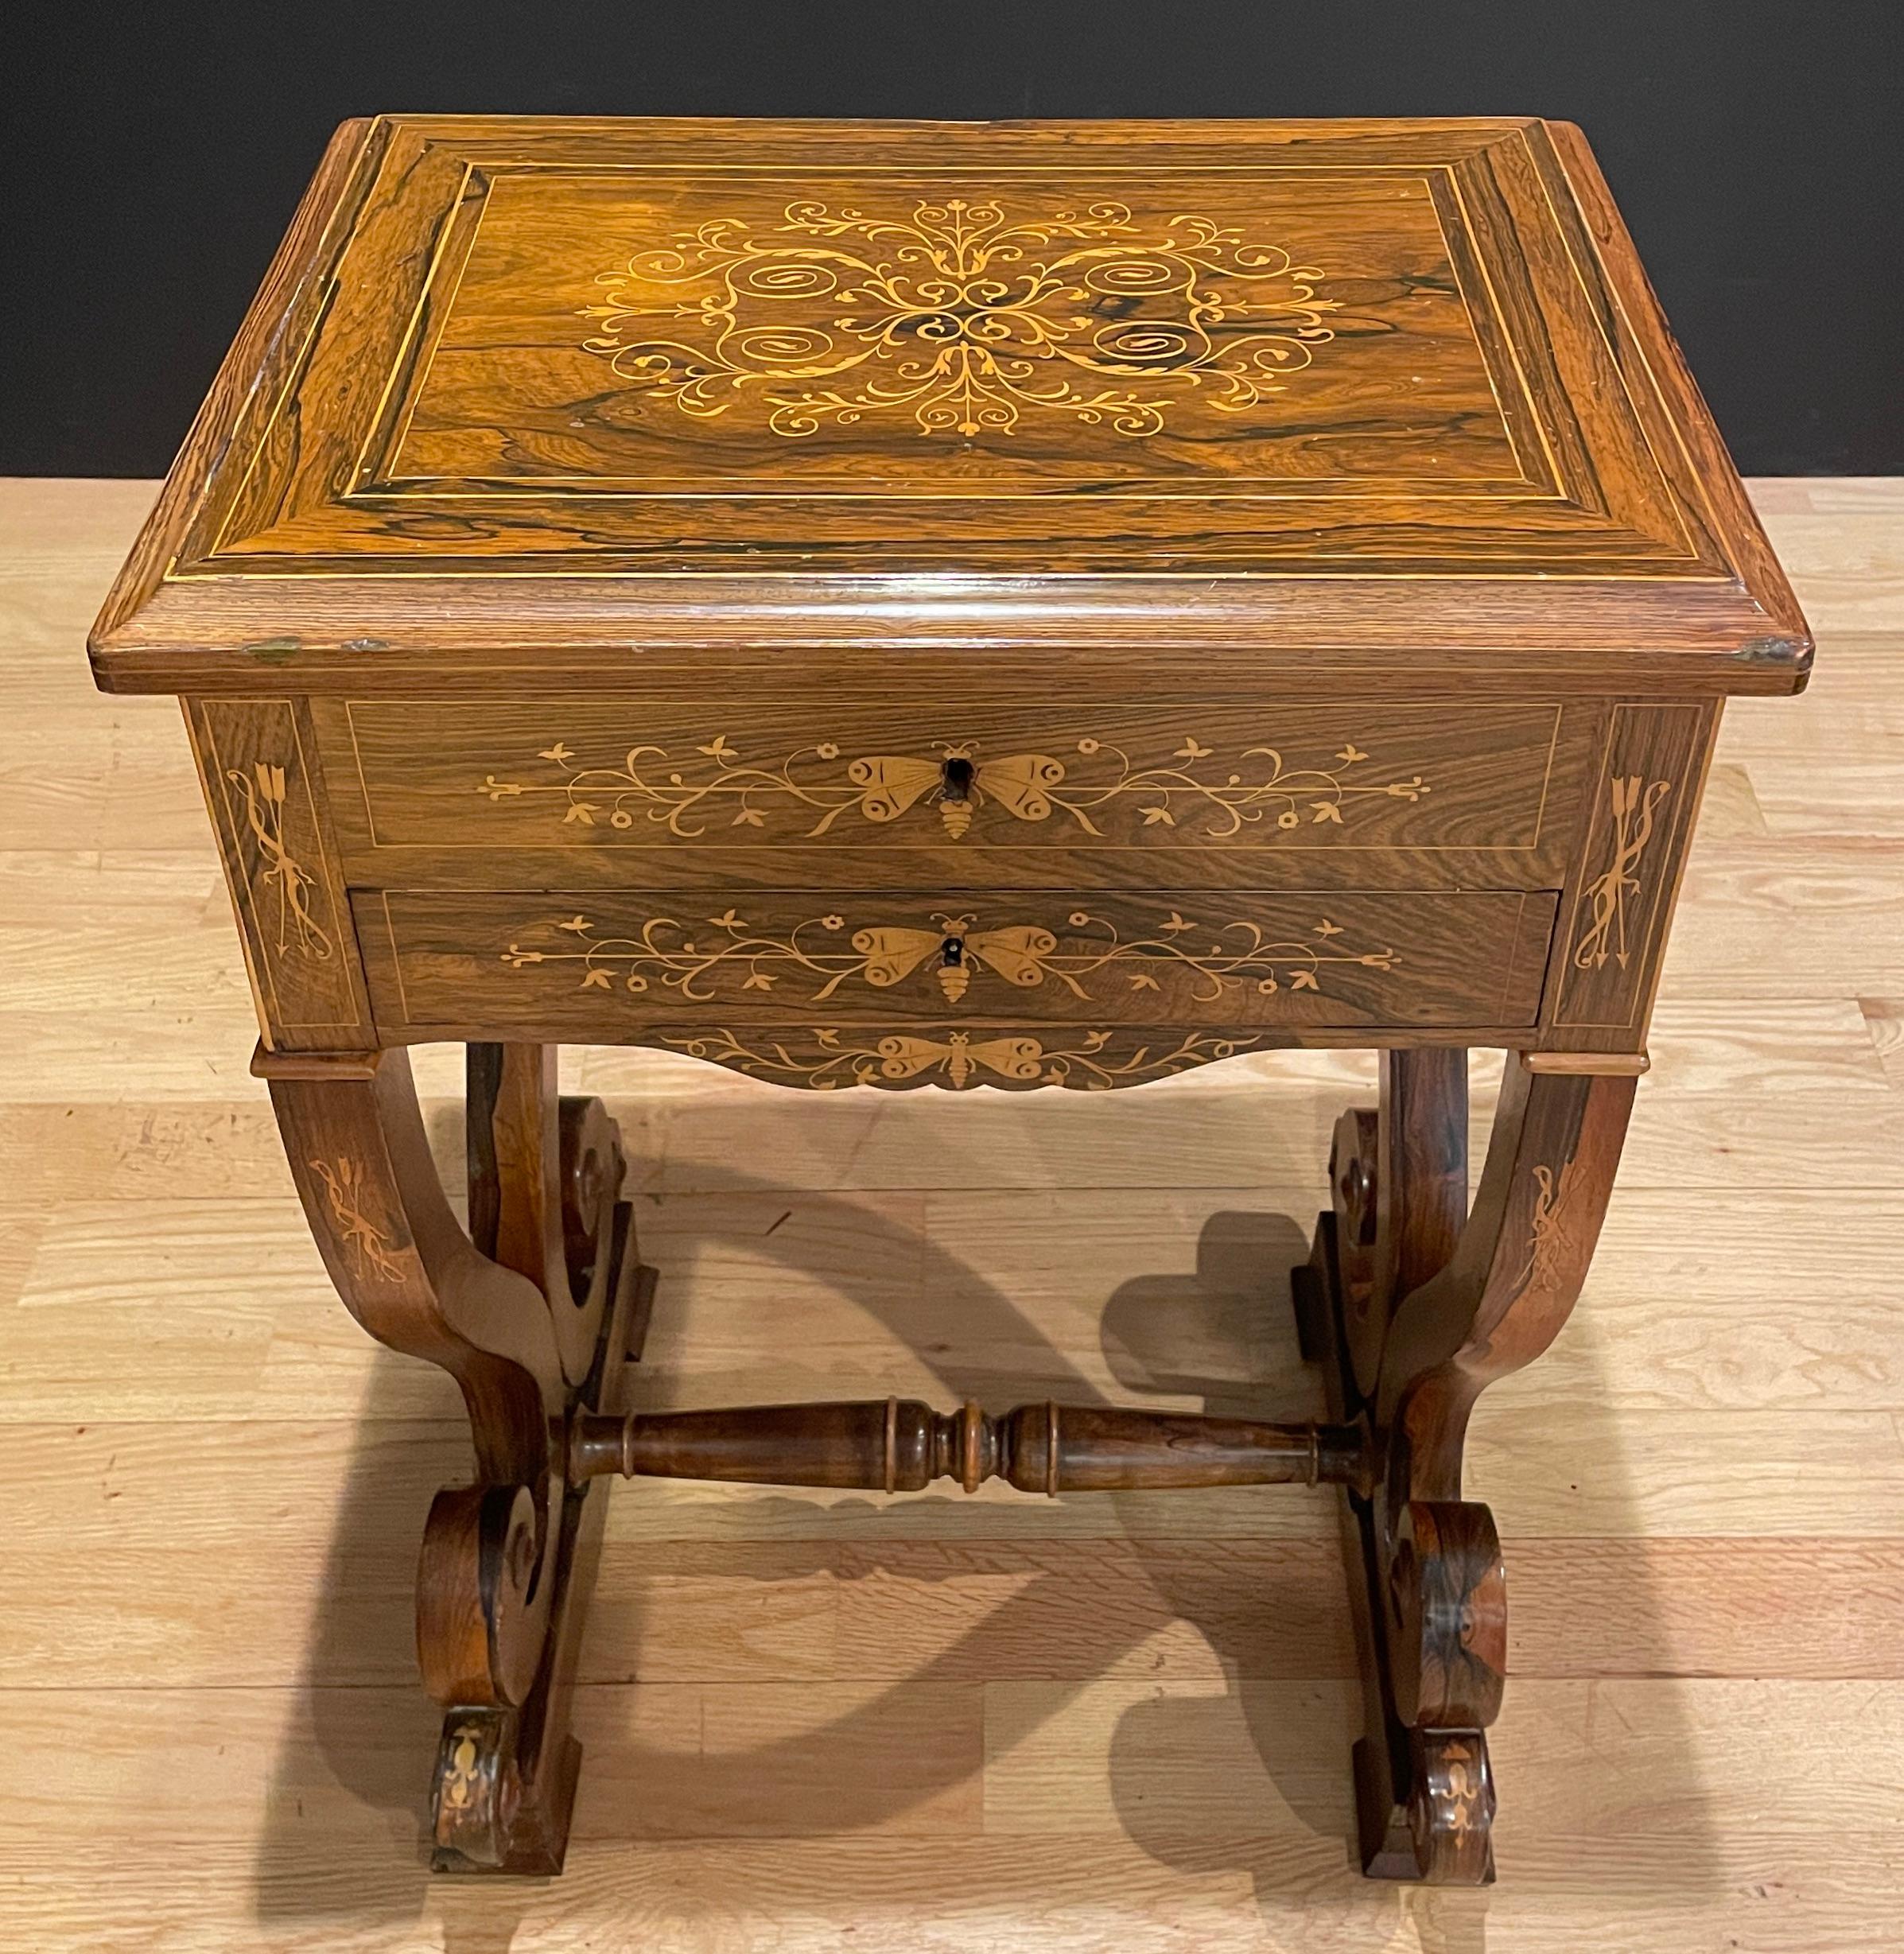 Fine quality Regency style 19th century rosewood and marquetry work table. Interior with individual compartments and mirror inside back of top. Inlay with butterflies and vines and leaves along with bow and arrows.